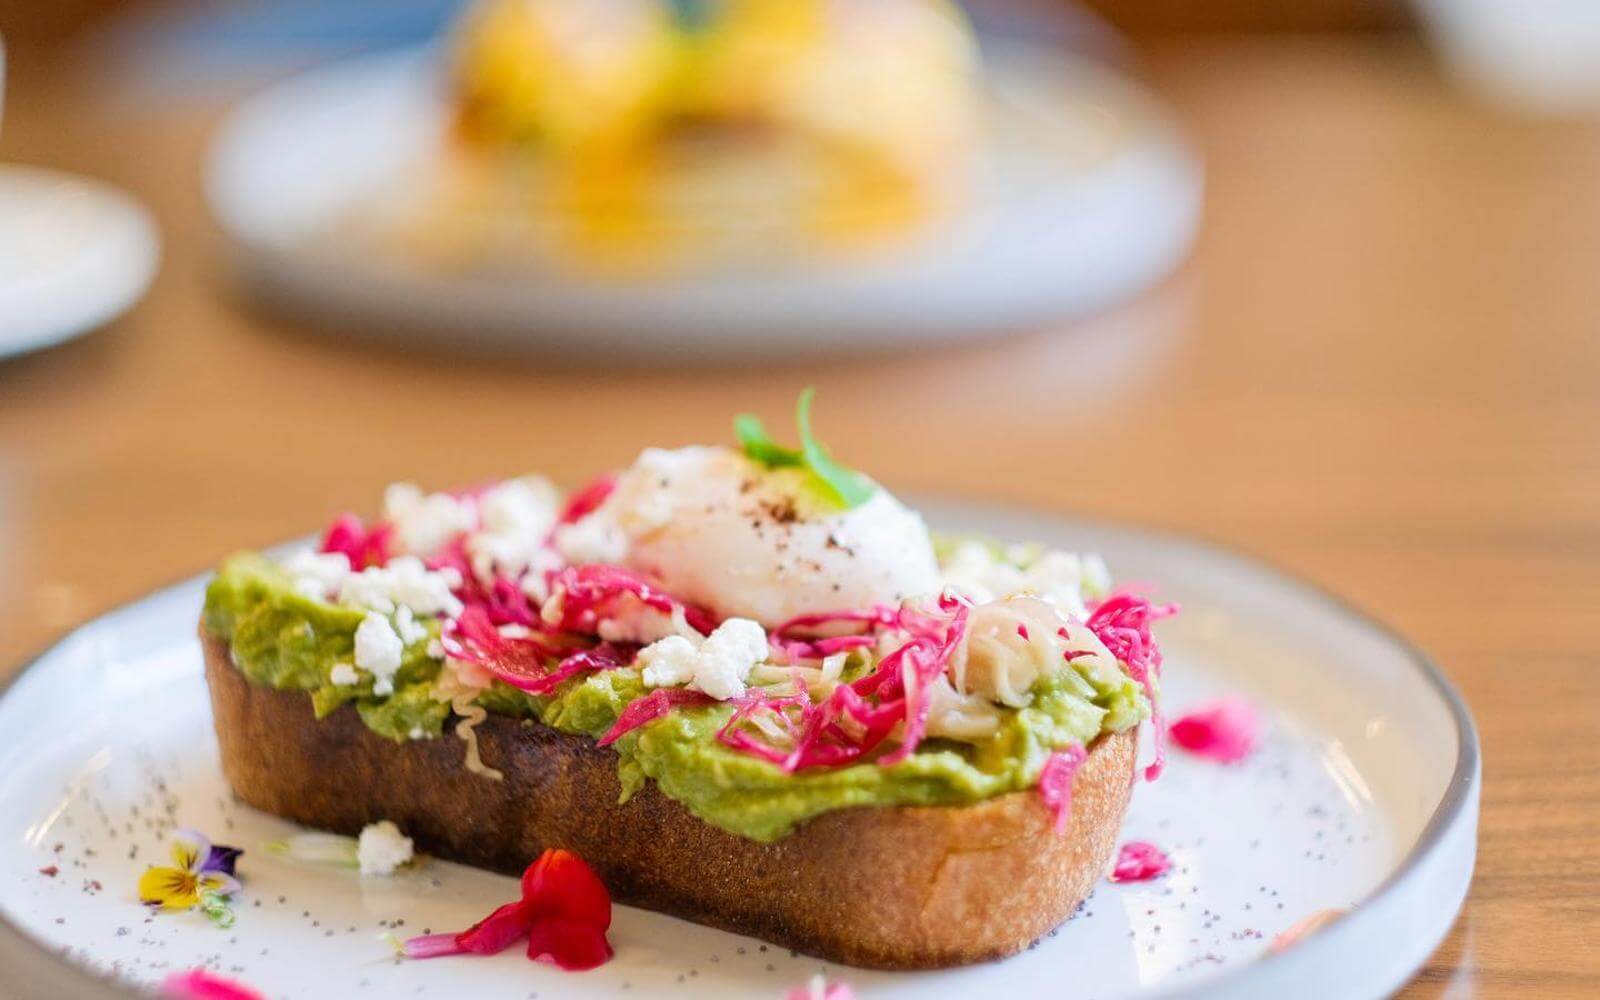 avocado toast and poached egg breakfast in vancouver bc at palate kitchen